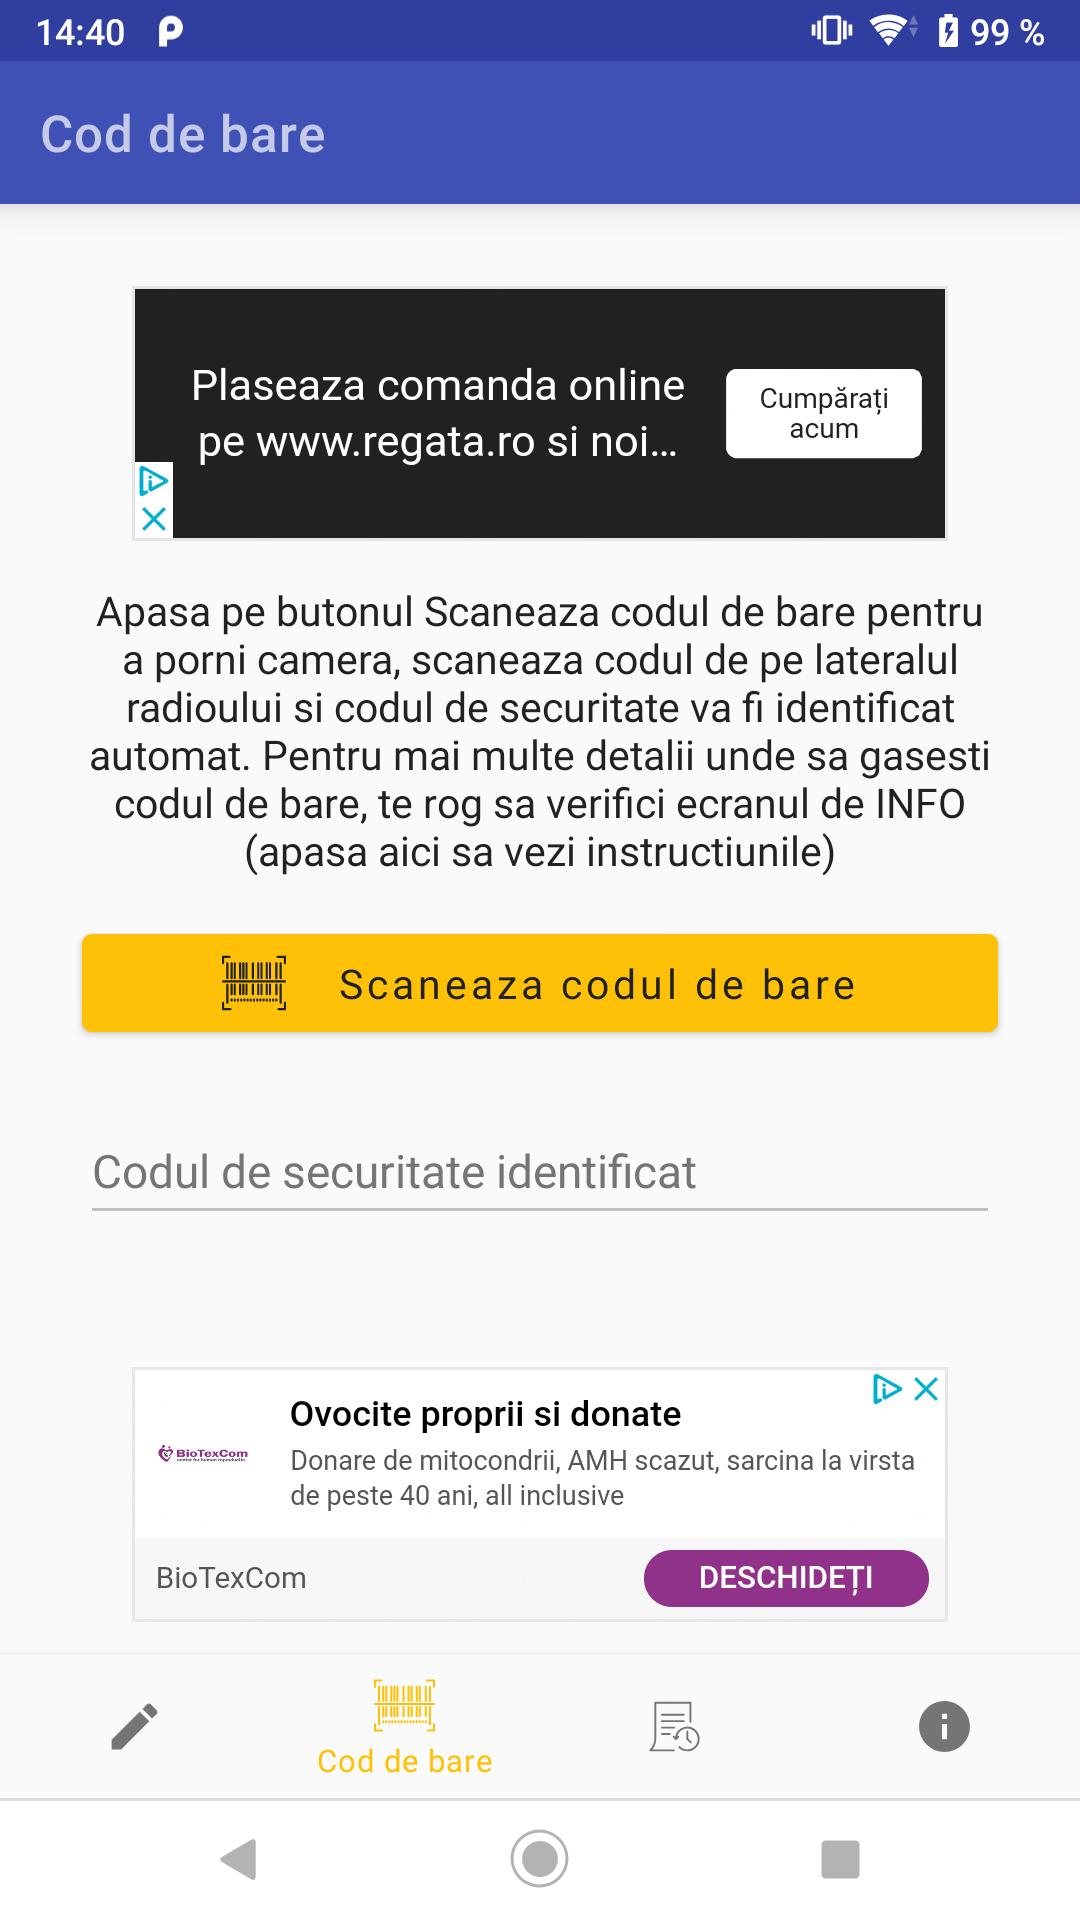 Renault Radio Code Generator for Android - Download